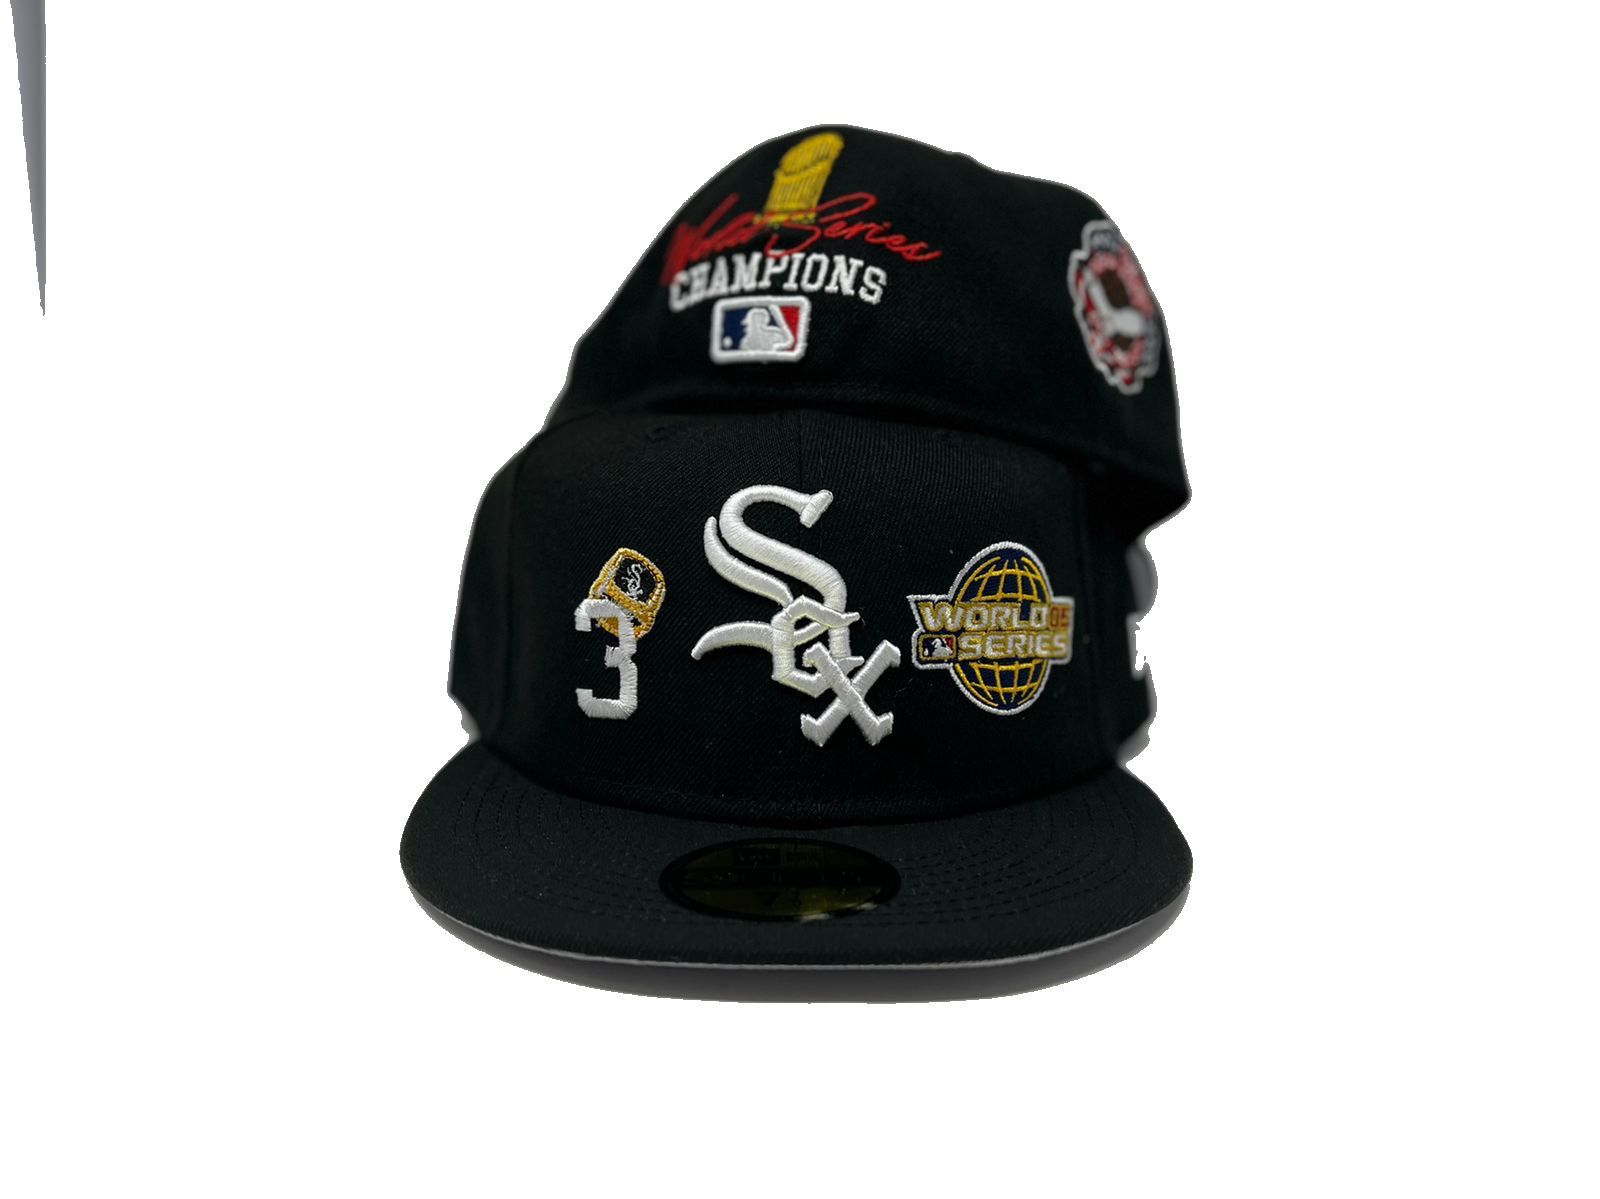 CHICAGO WHITE SOX 3x WORLD SERIES CHAMPIONS NEW ERA FITTED CAP